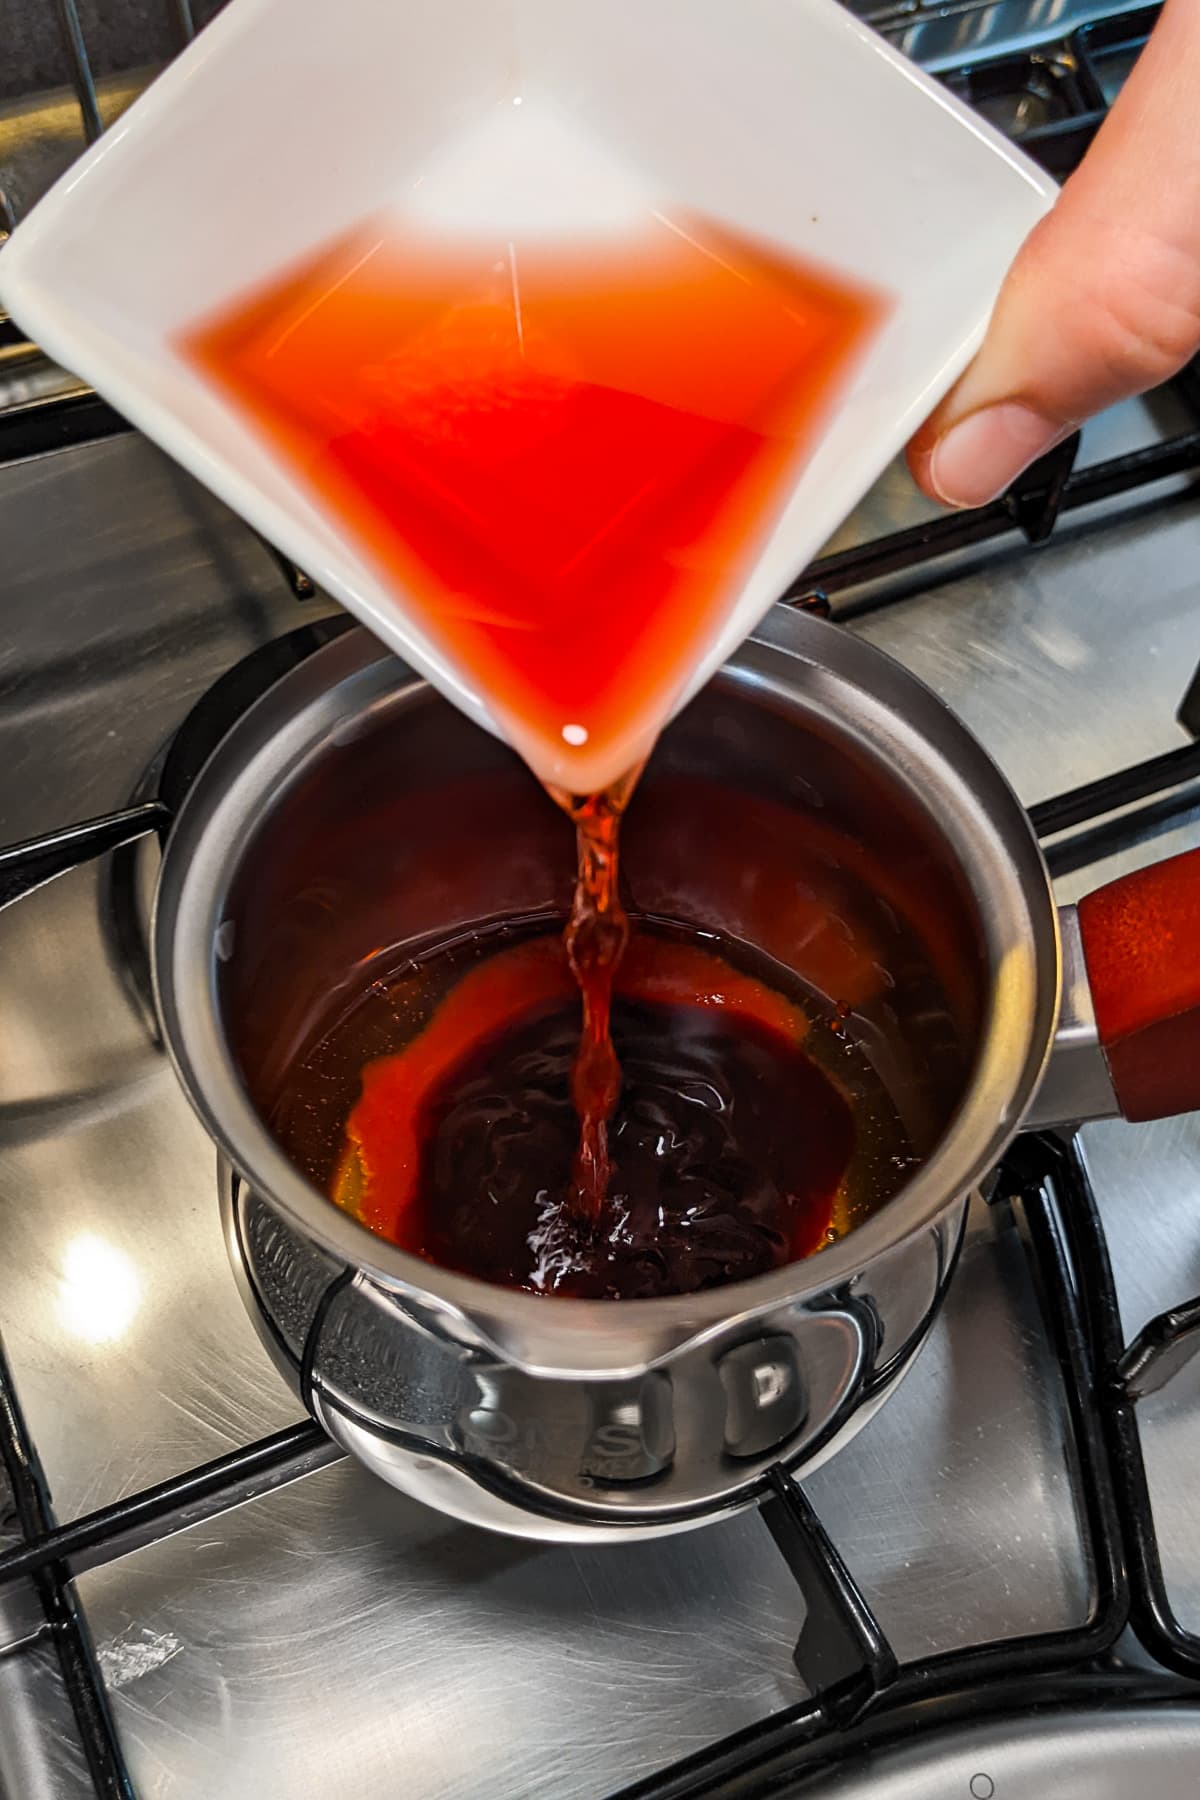 Pouring red wine vinegar in a small sauce pan on the stove.